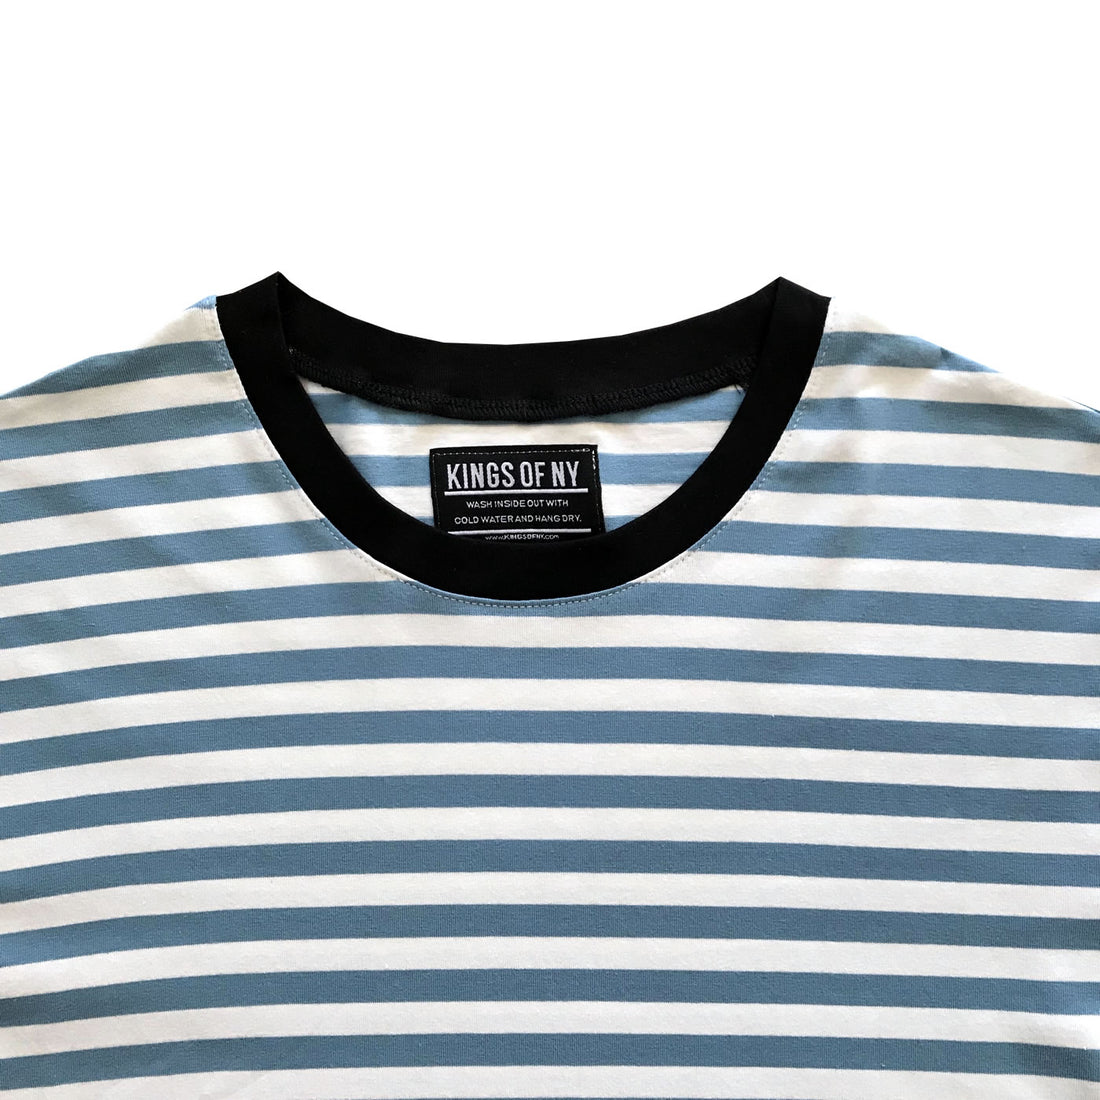 Blue And White Striped Mens T-Shirt